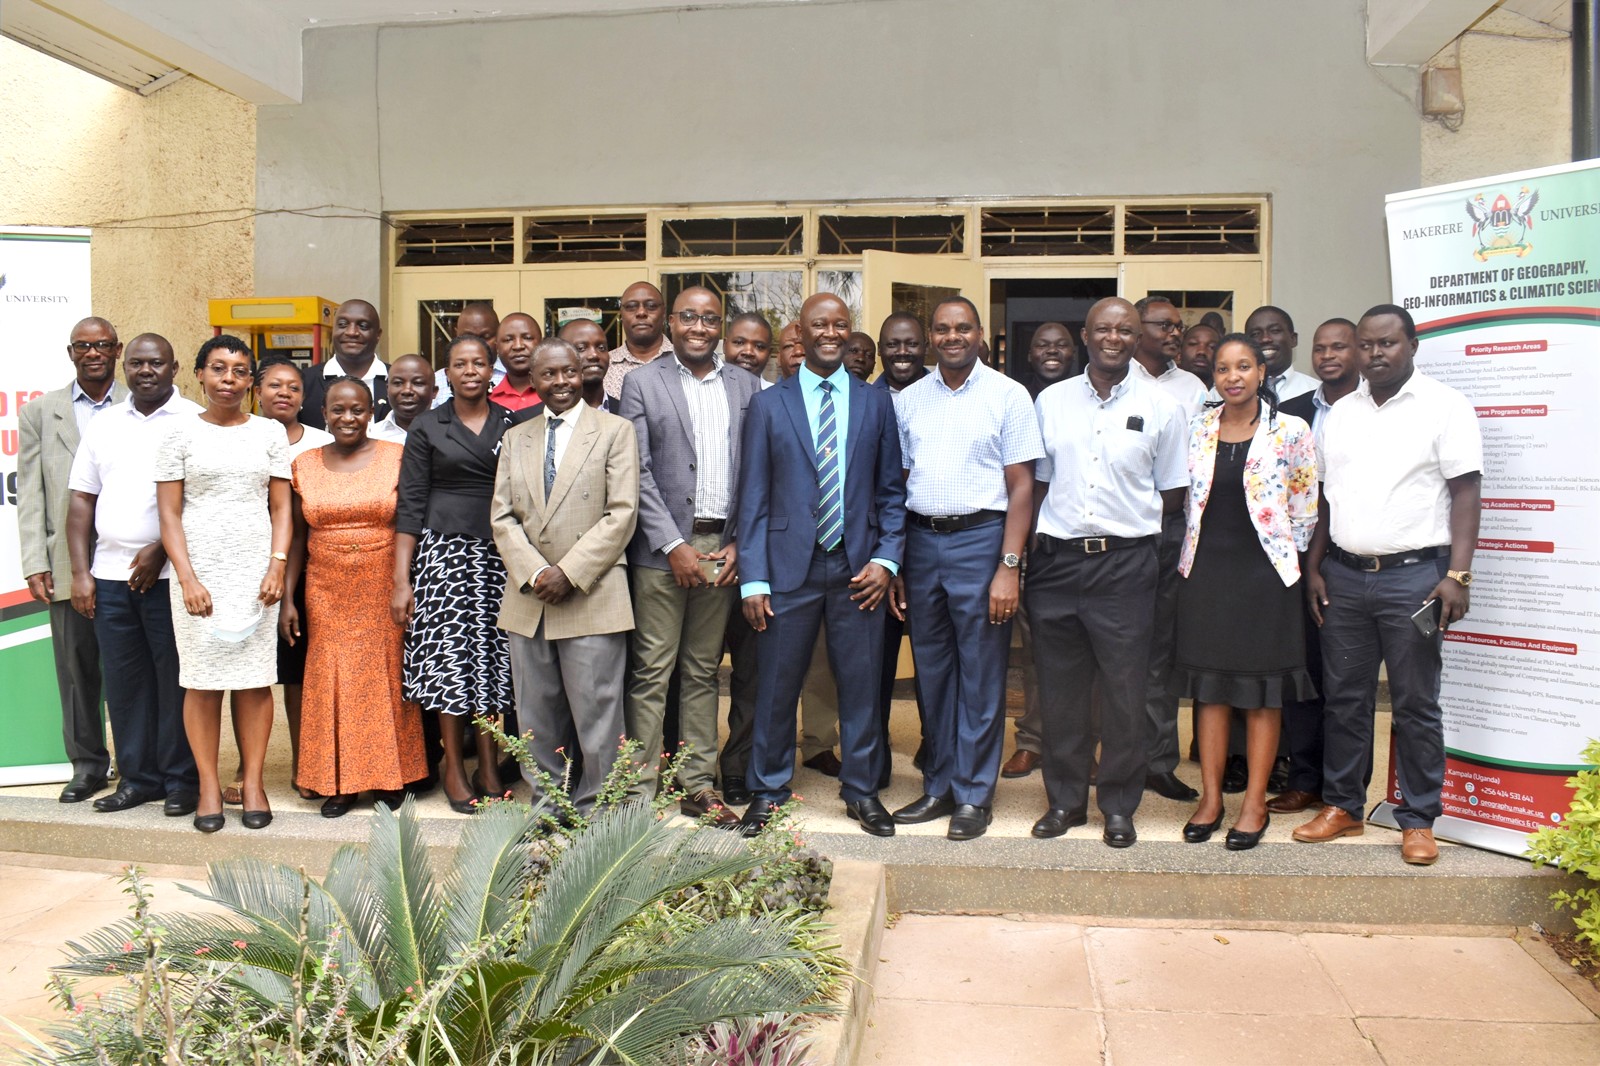 Participants in a group photo during the stakeholder engagement held at the School of Forestry, Environmental and Geographical Sciences on 3rd August 2022 .